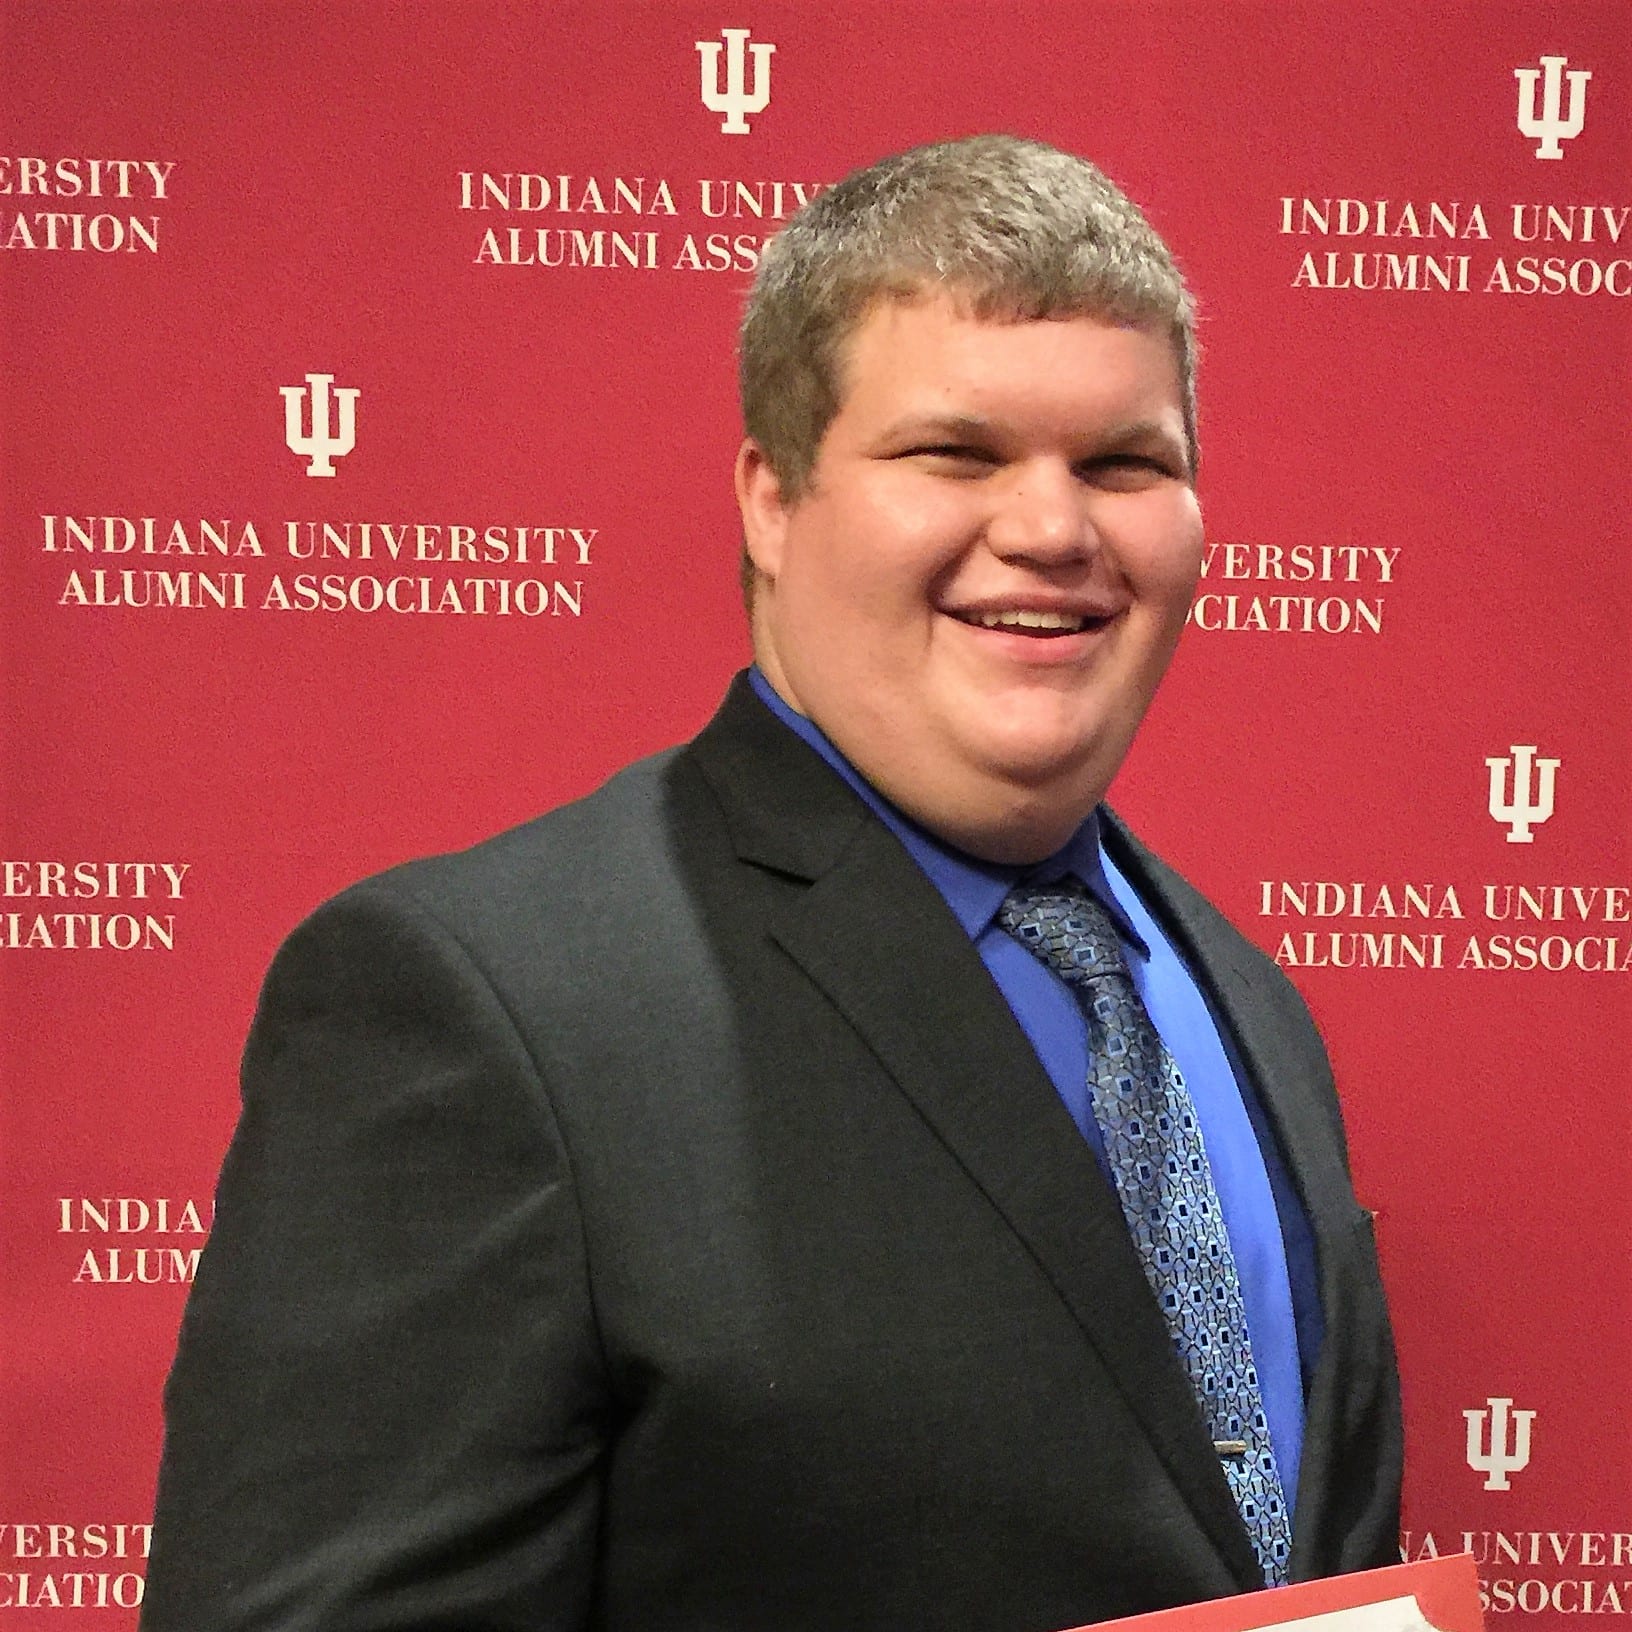 Justin Weisenbach, SPEA student chosen as IUPUI Top 100 Students